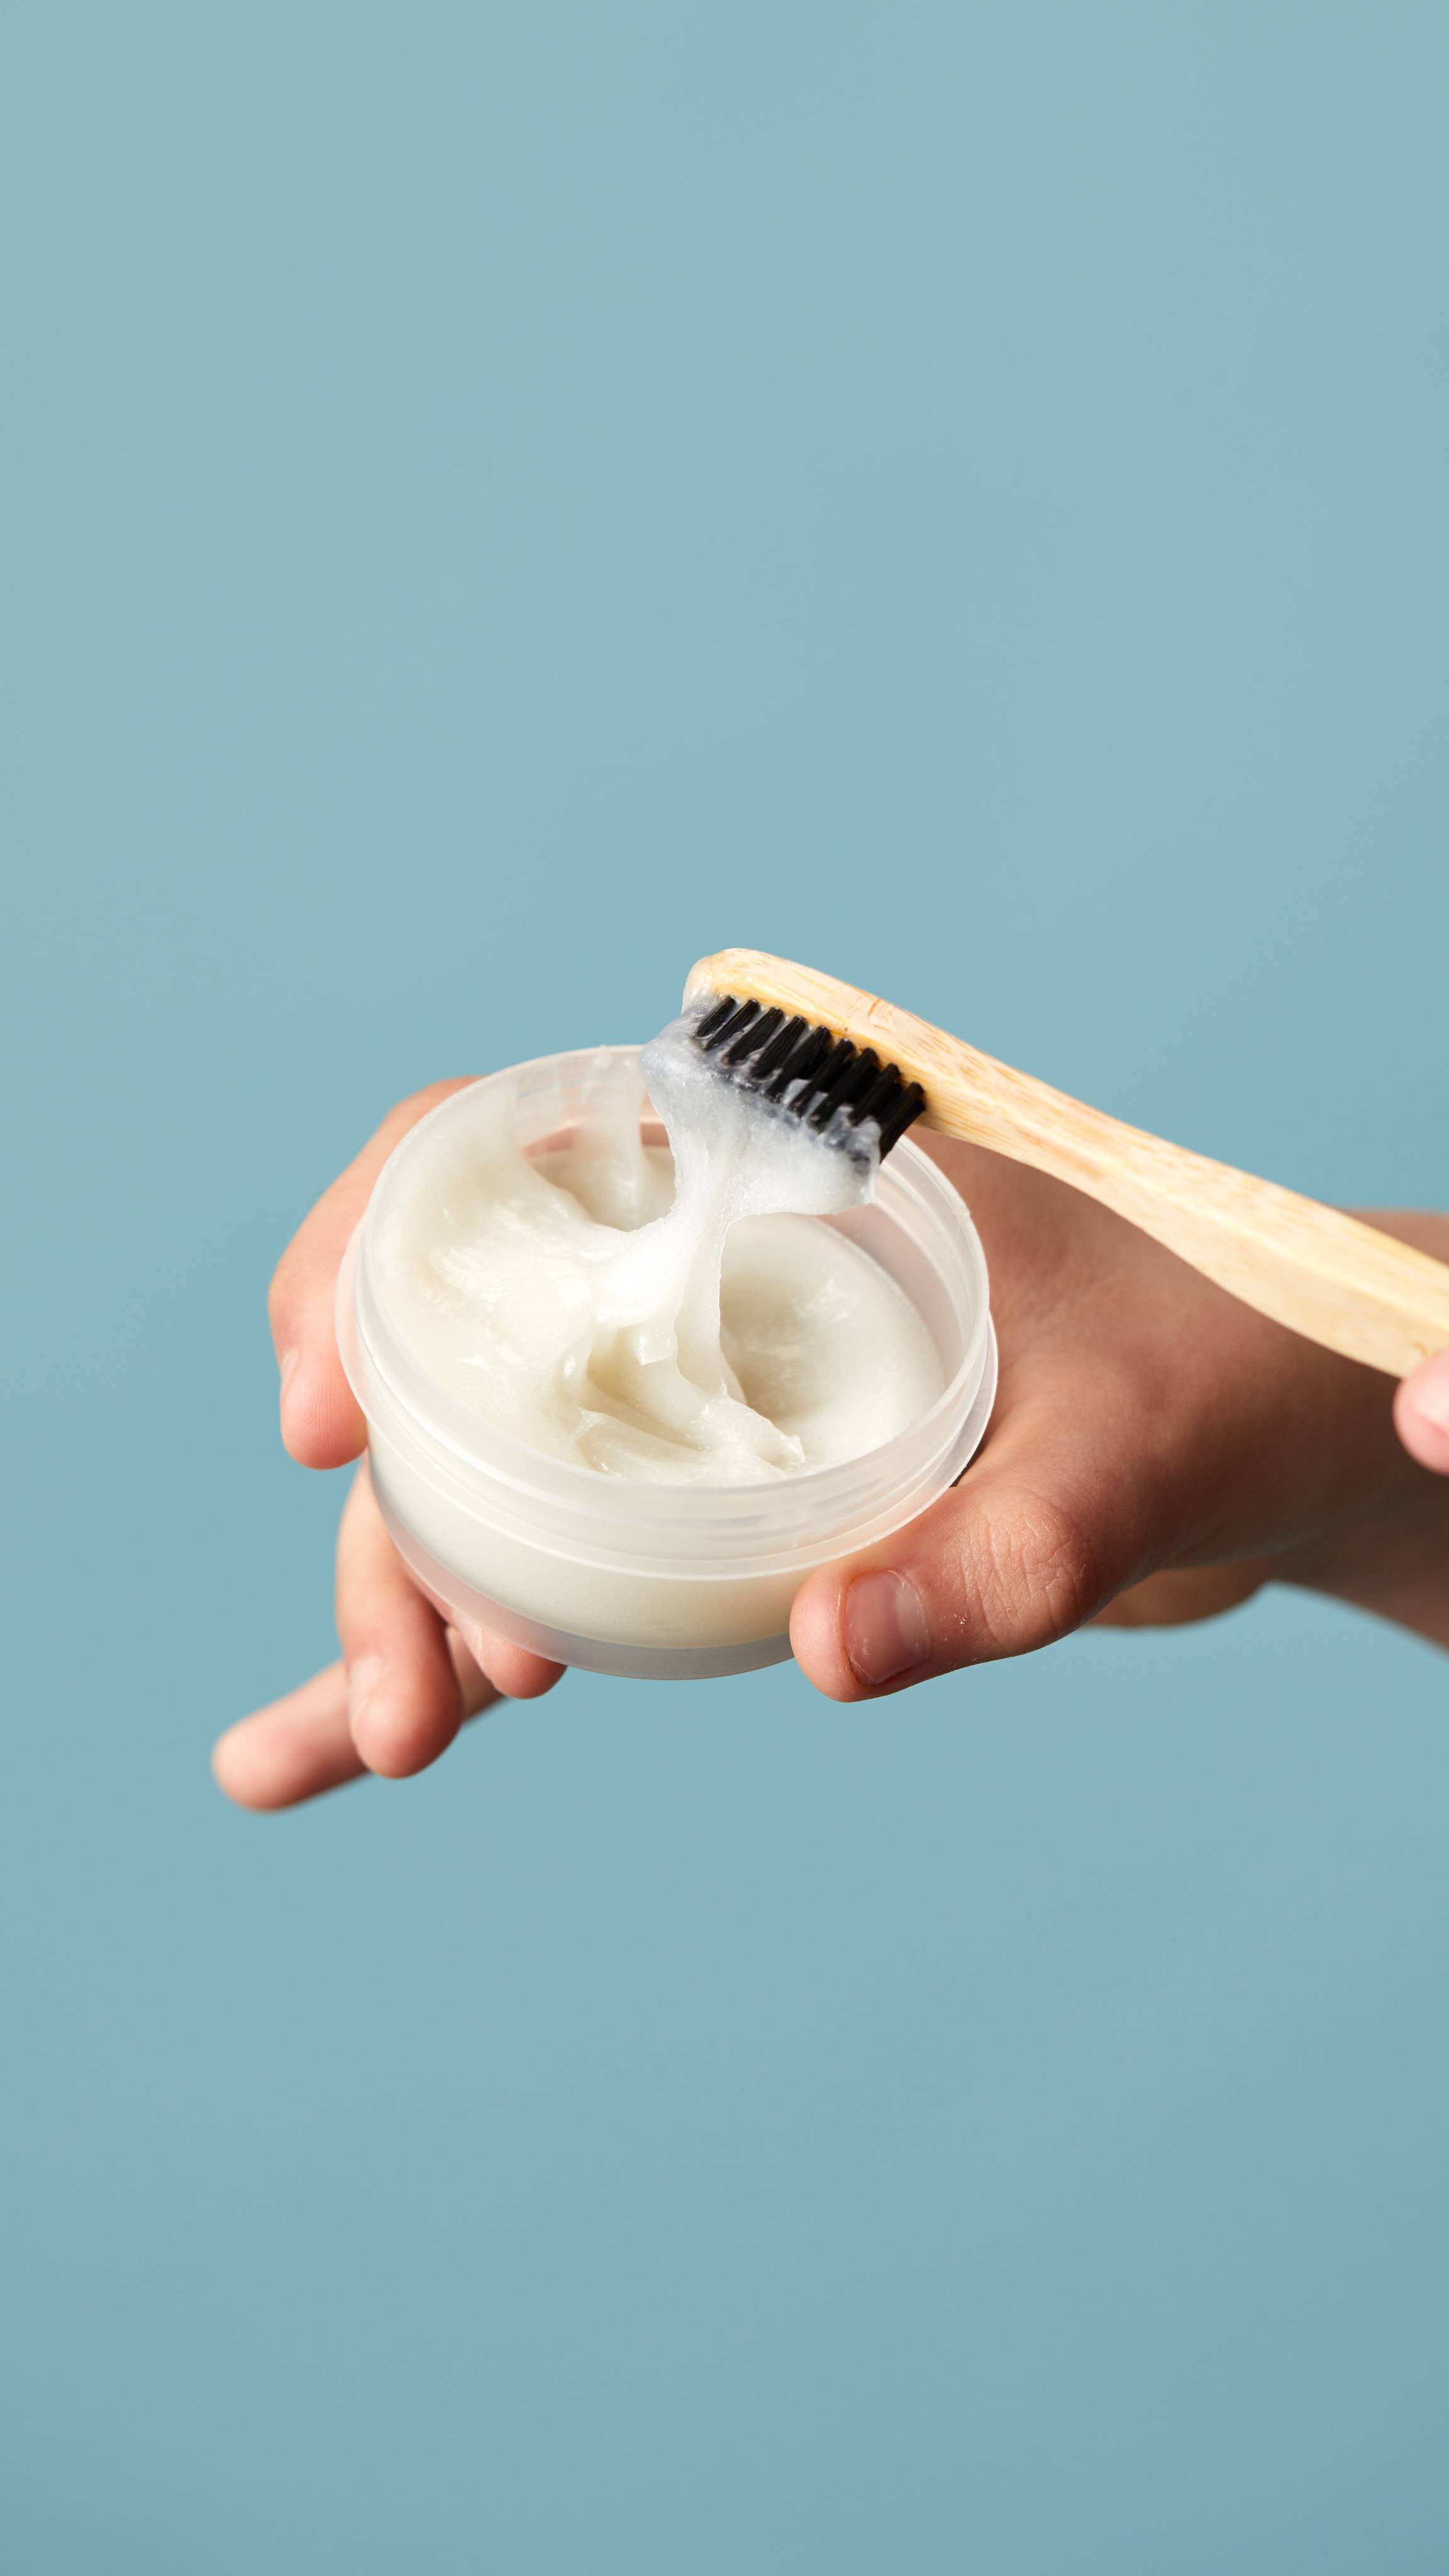 The model's hands hold the pot of toothpaste while dipping a bamboo toothbrush into the paste on a pale blue background.